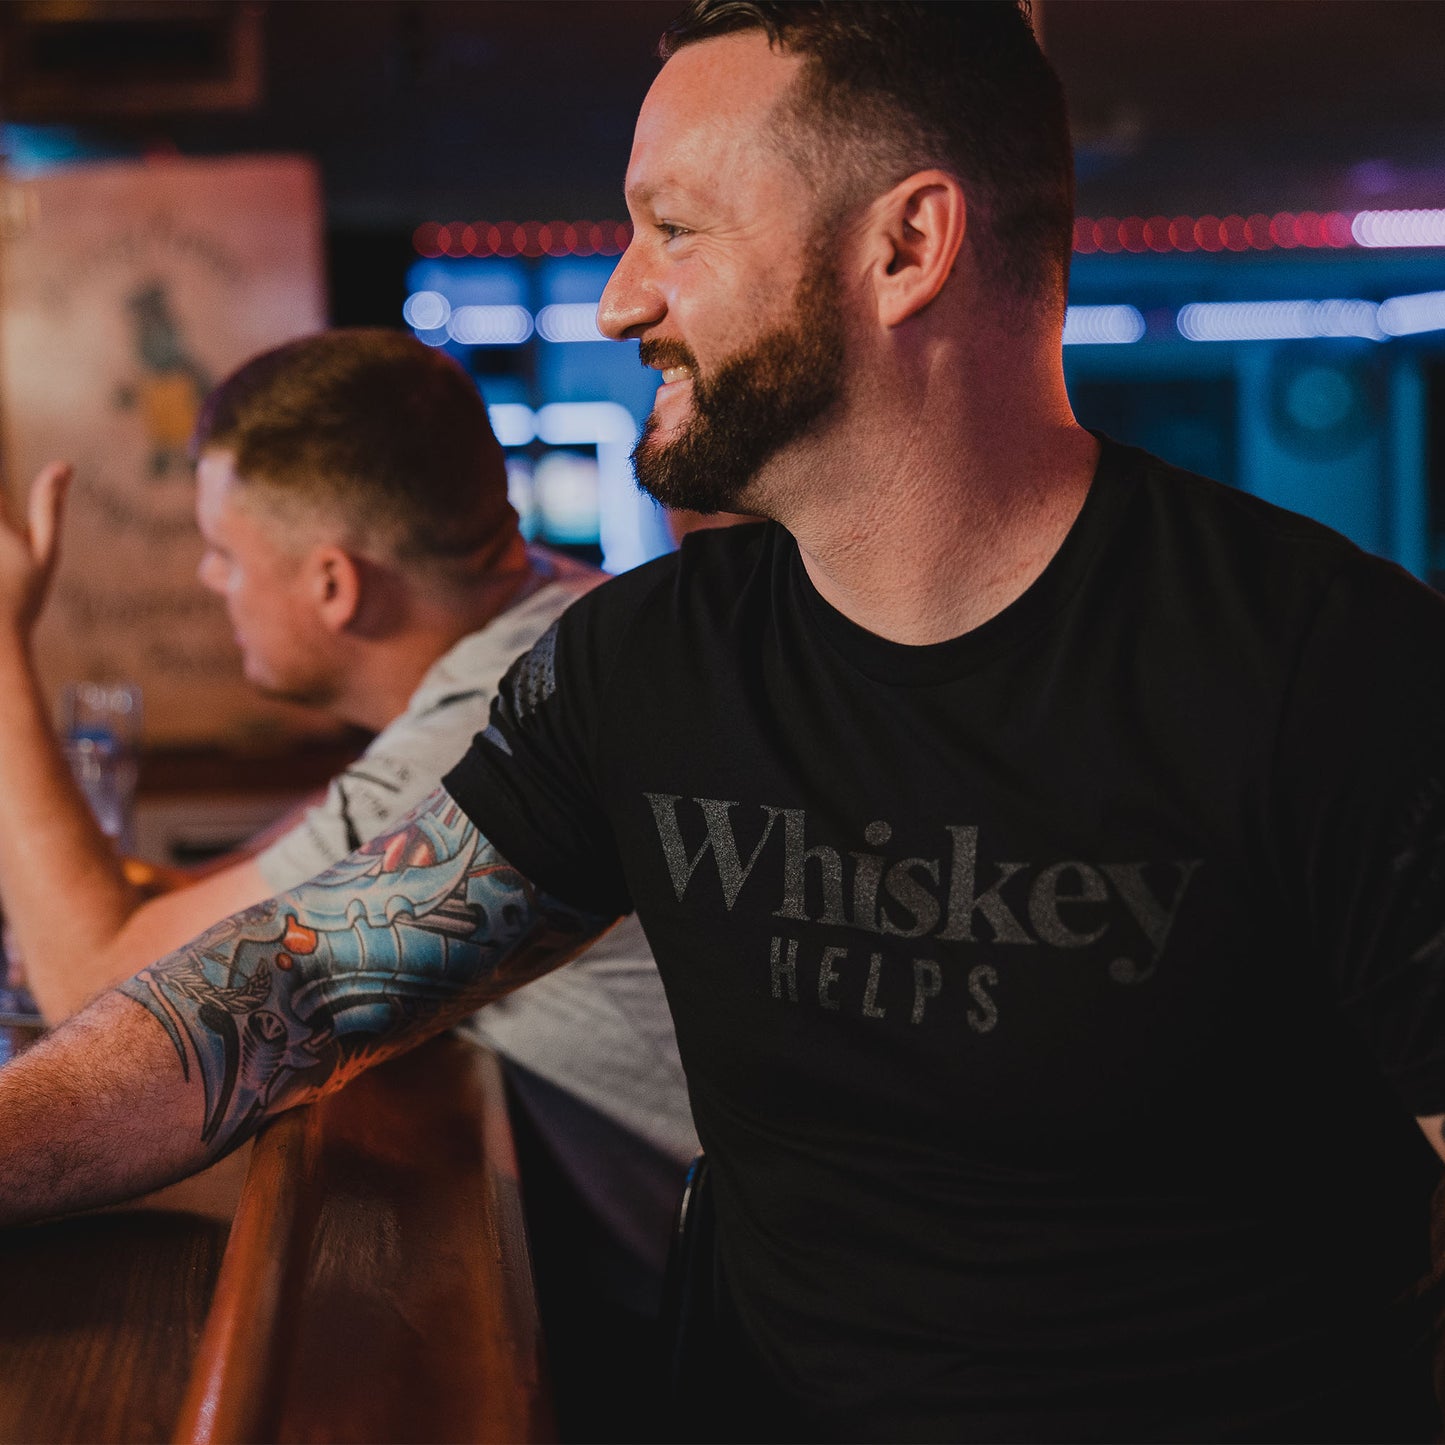 Whiskey Helps Graphic Alcohol T-Shirt 